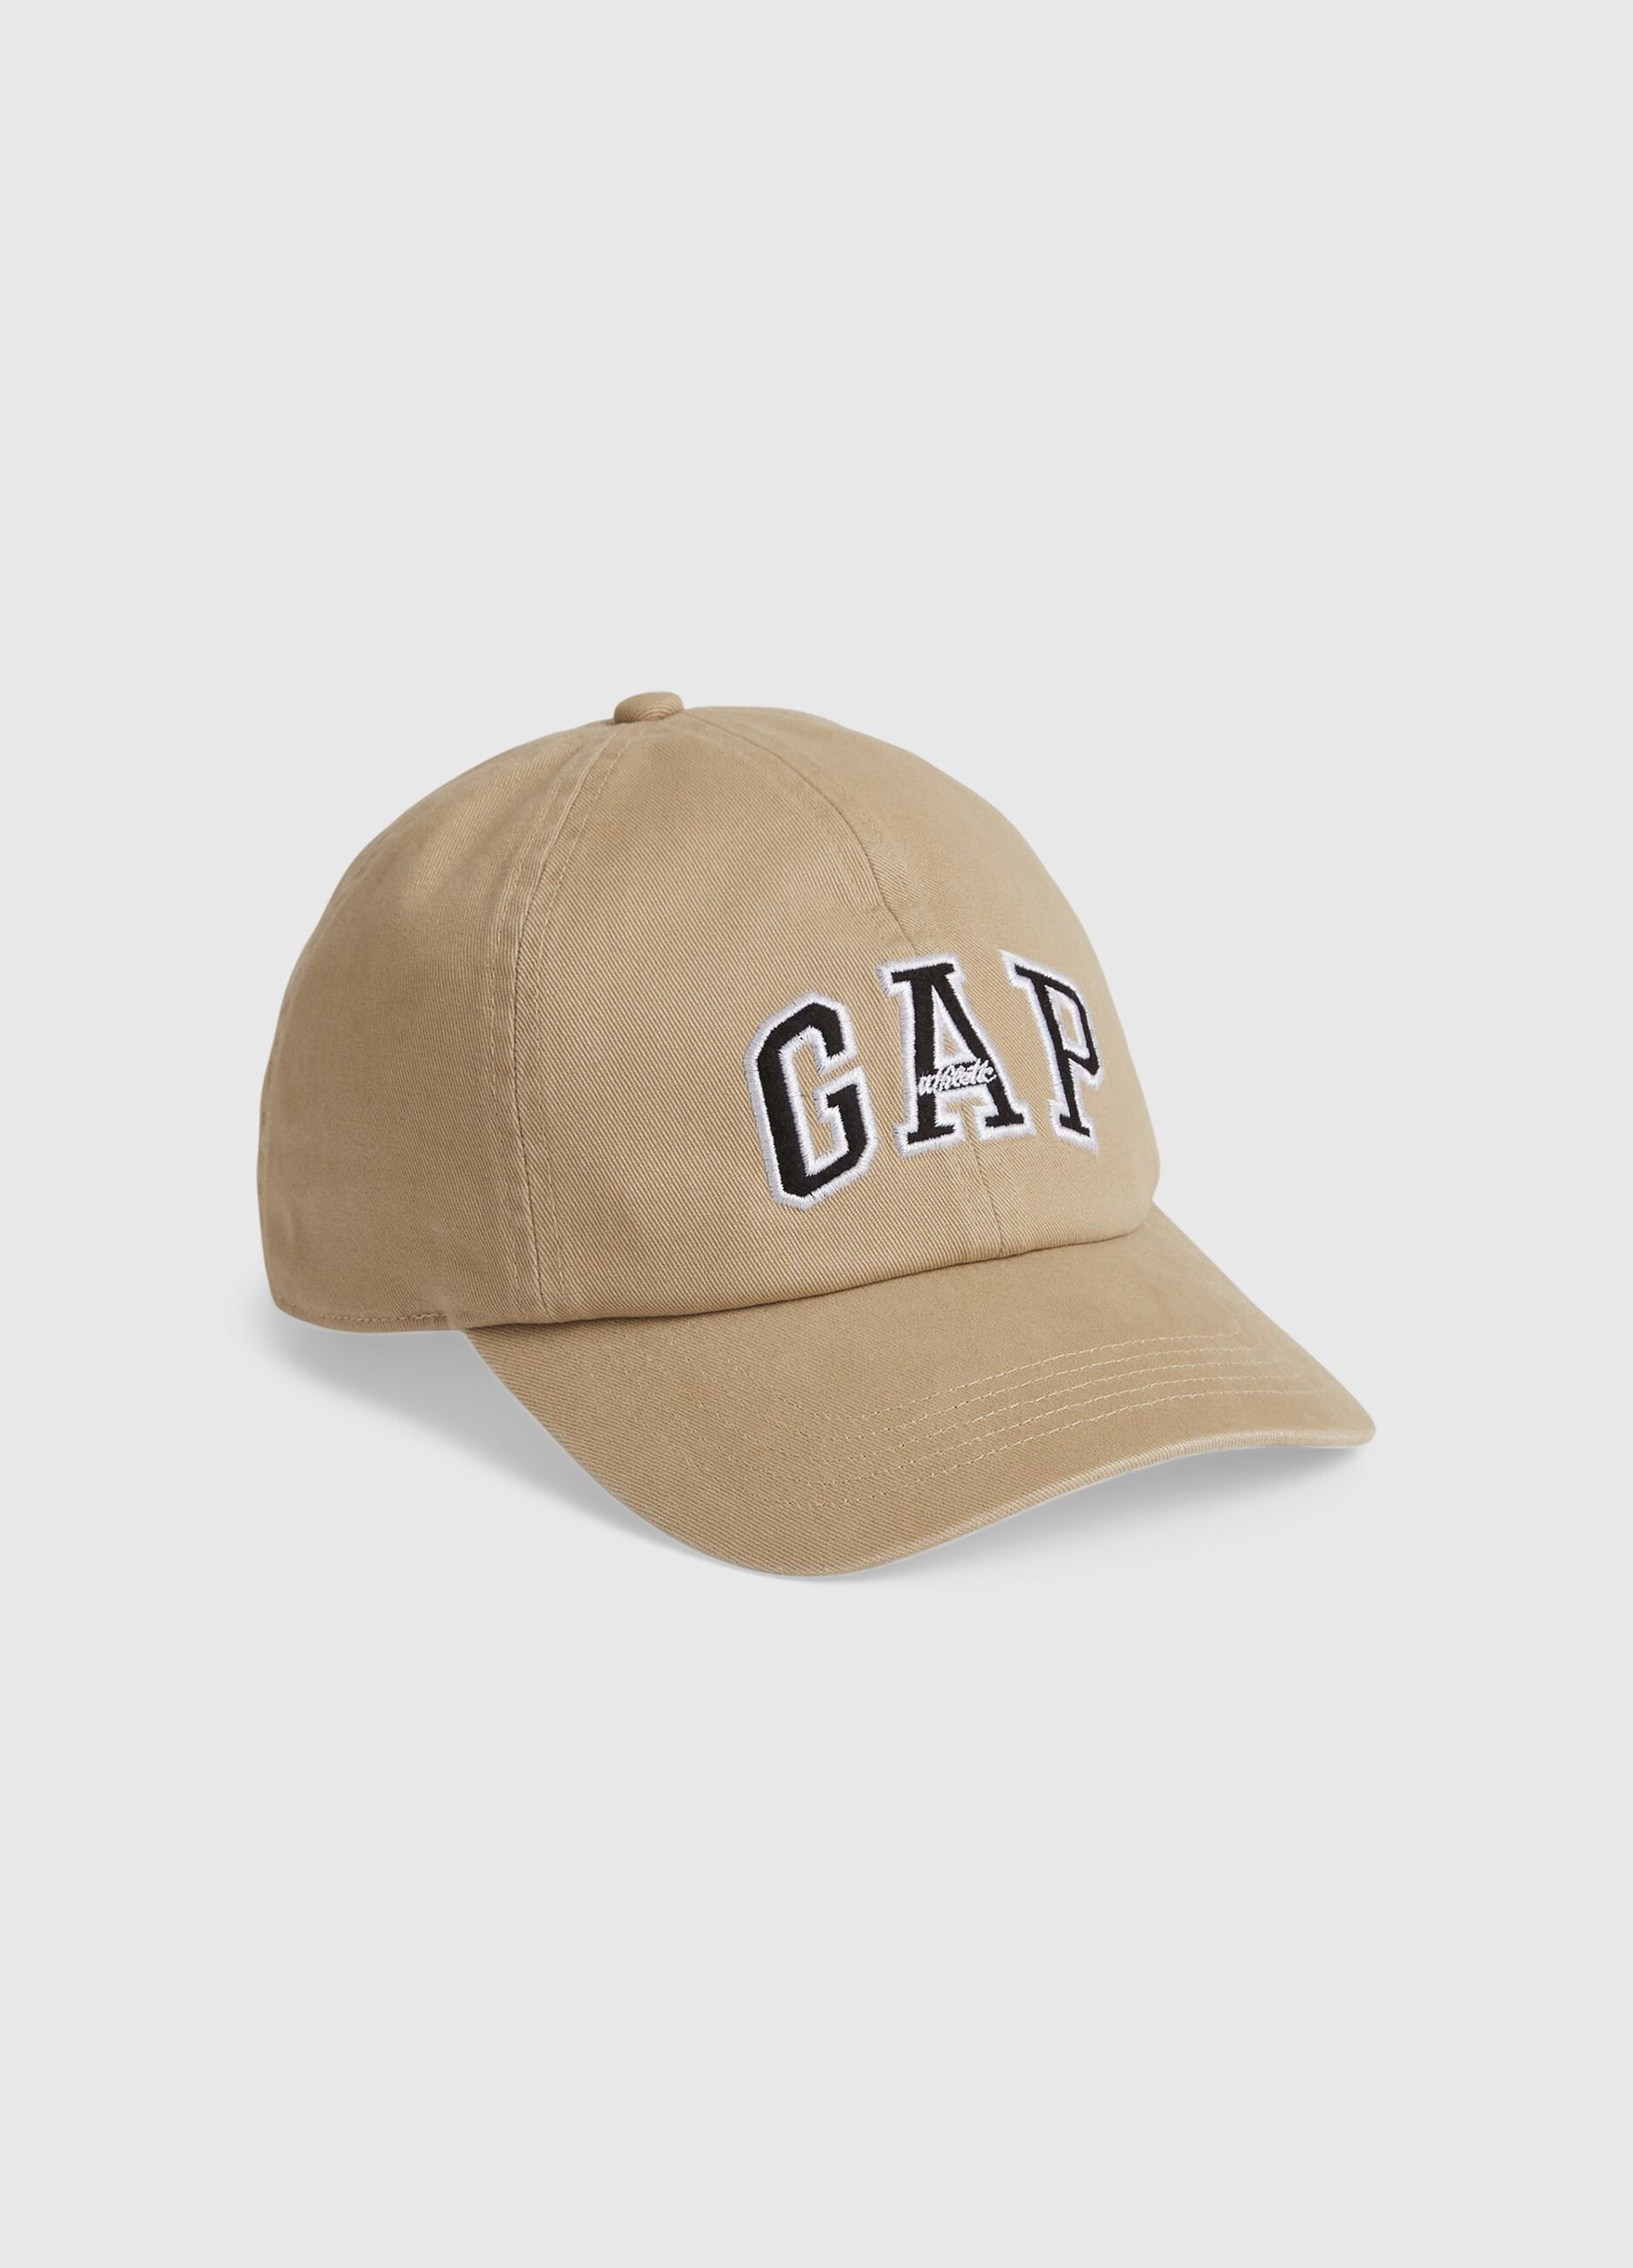 Baseball cap with embroidered logo.